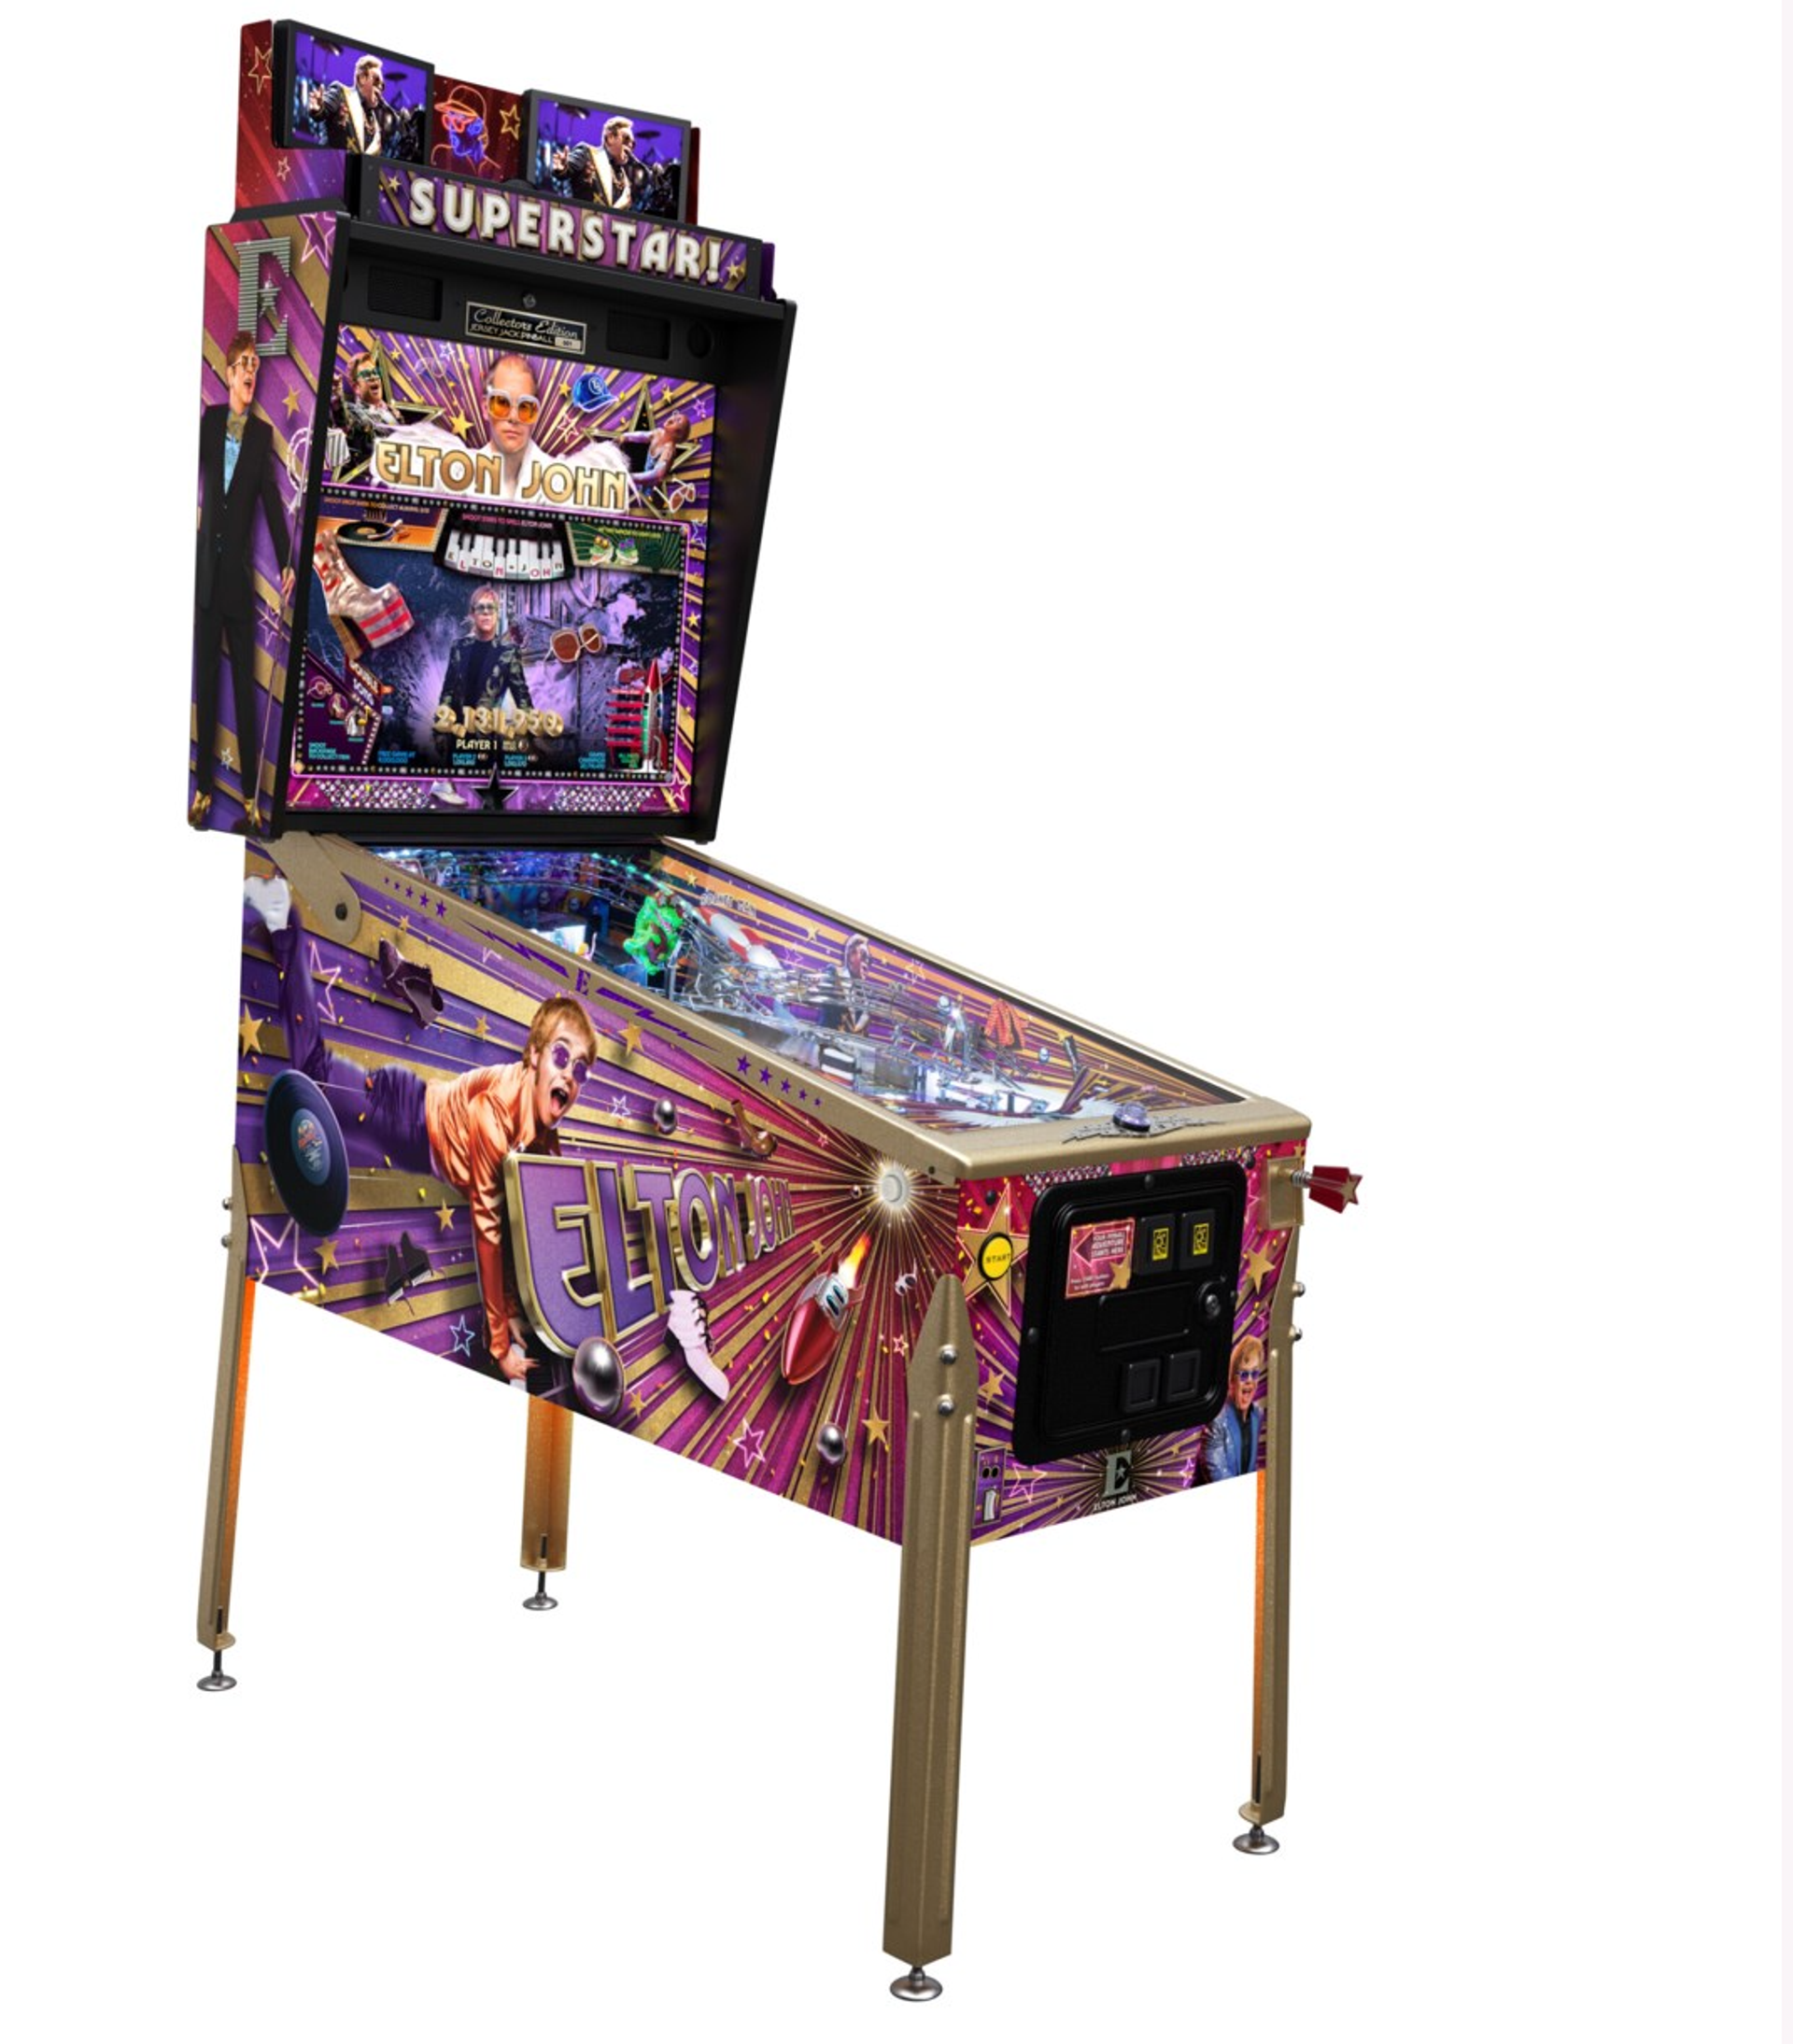 A traditional pinball machine, decorated with portraits of John and bright musical motifs.